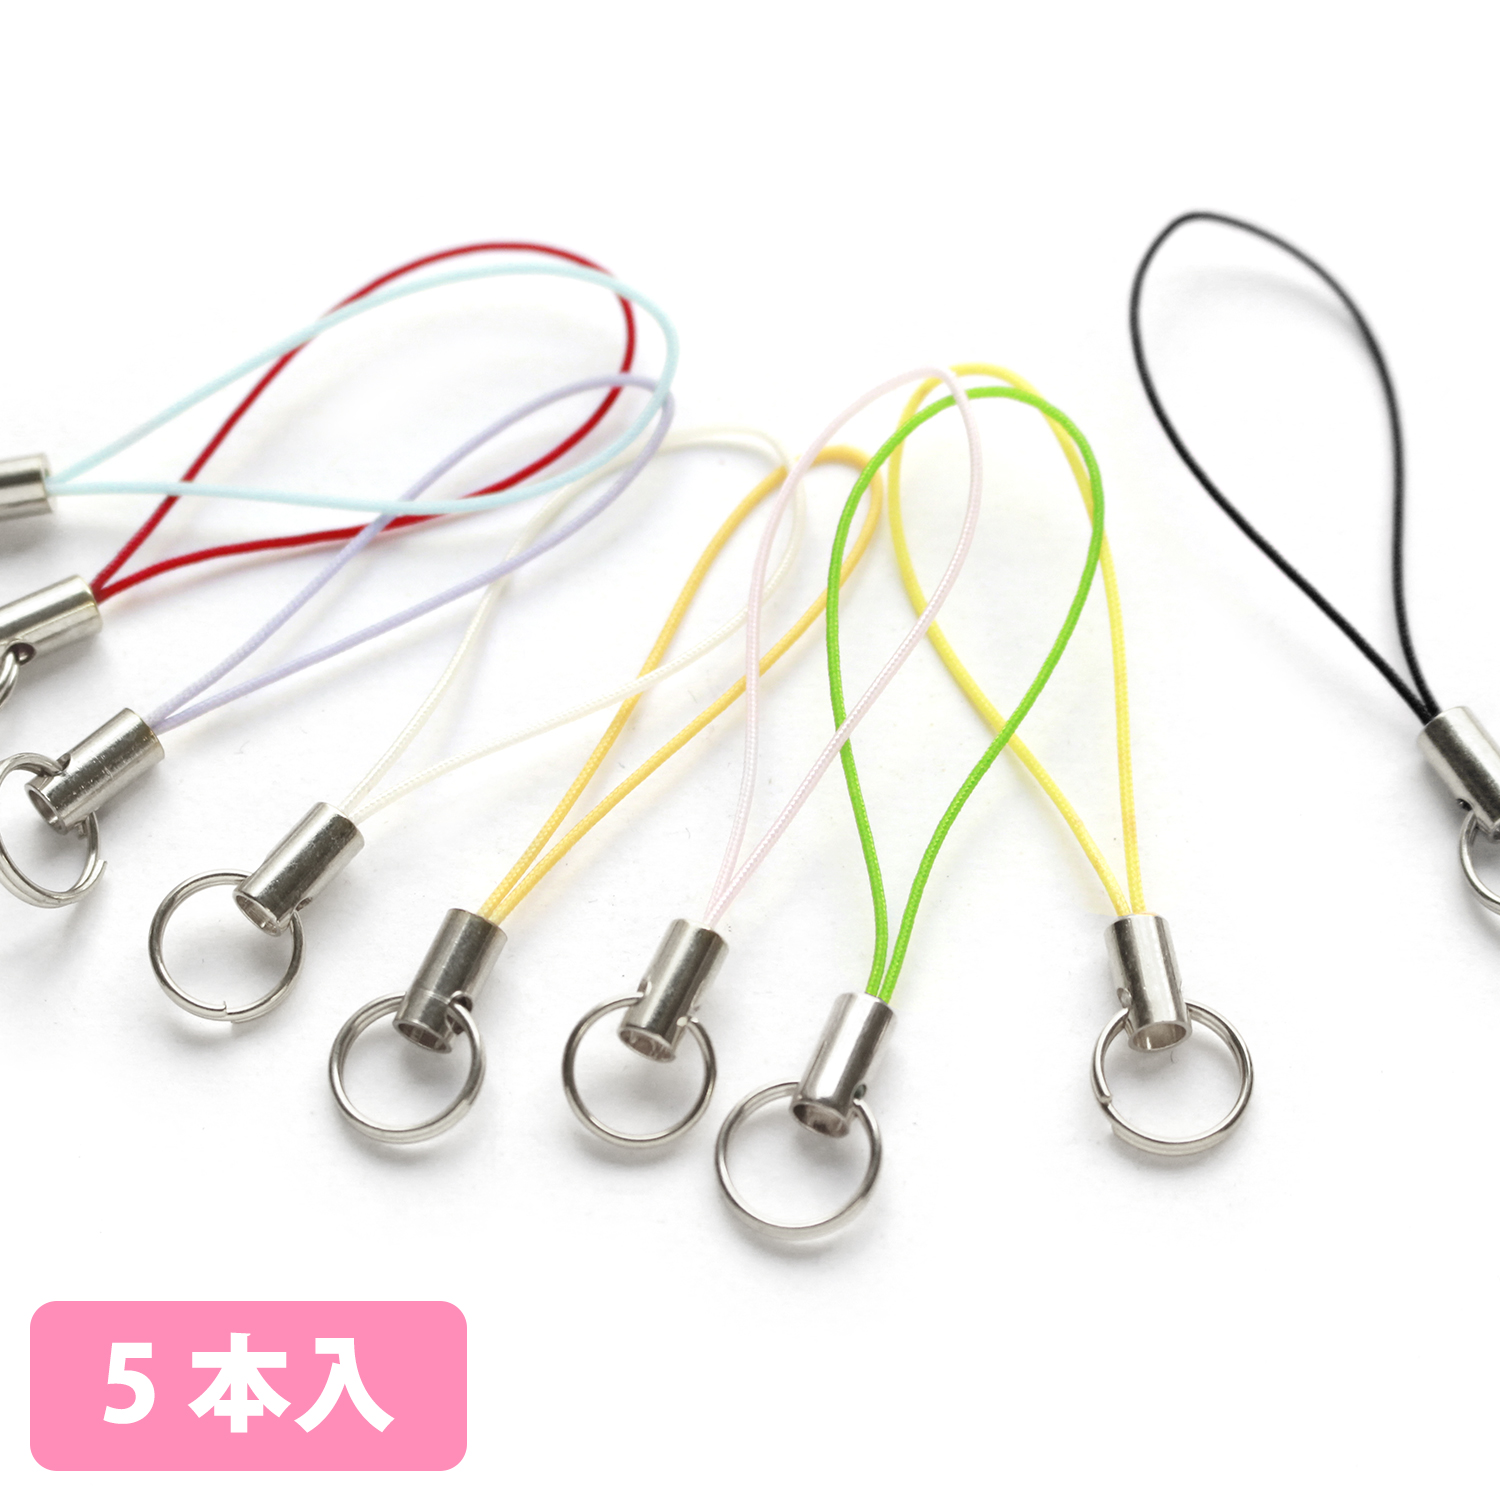 KD Cellphone Strap with Jump Ring S 5pcs (pack)